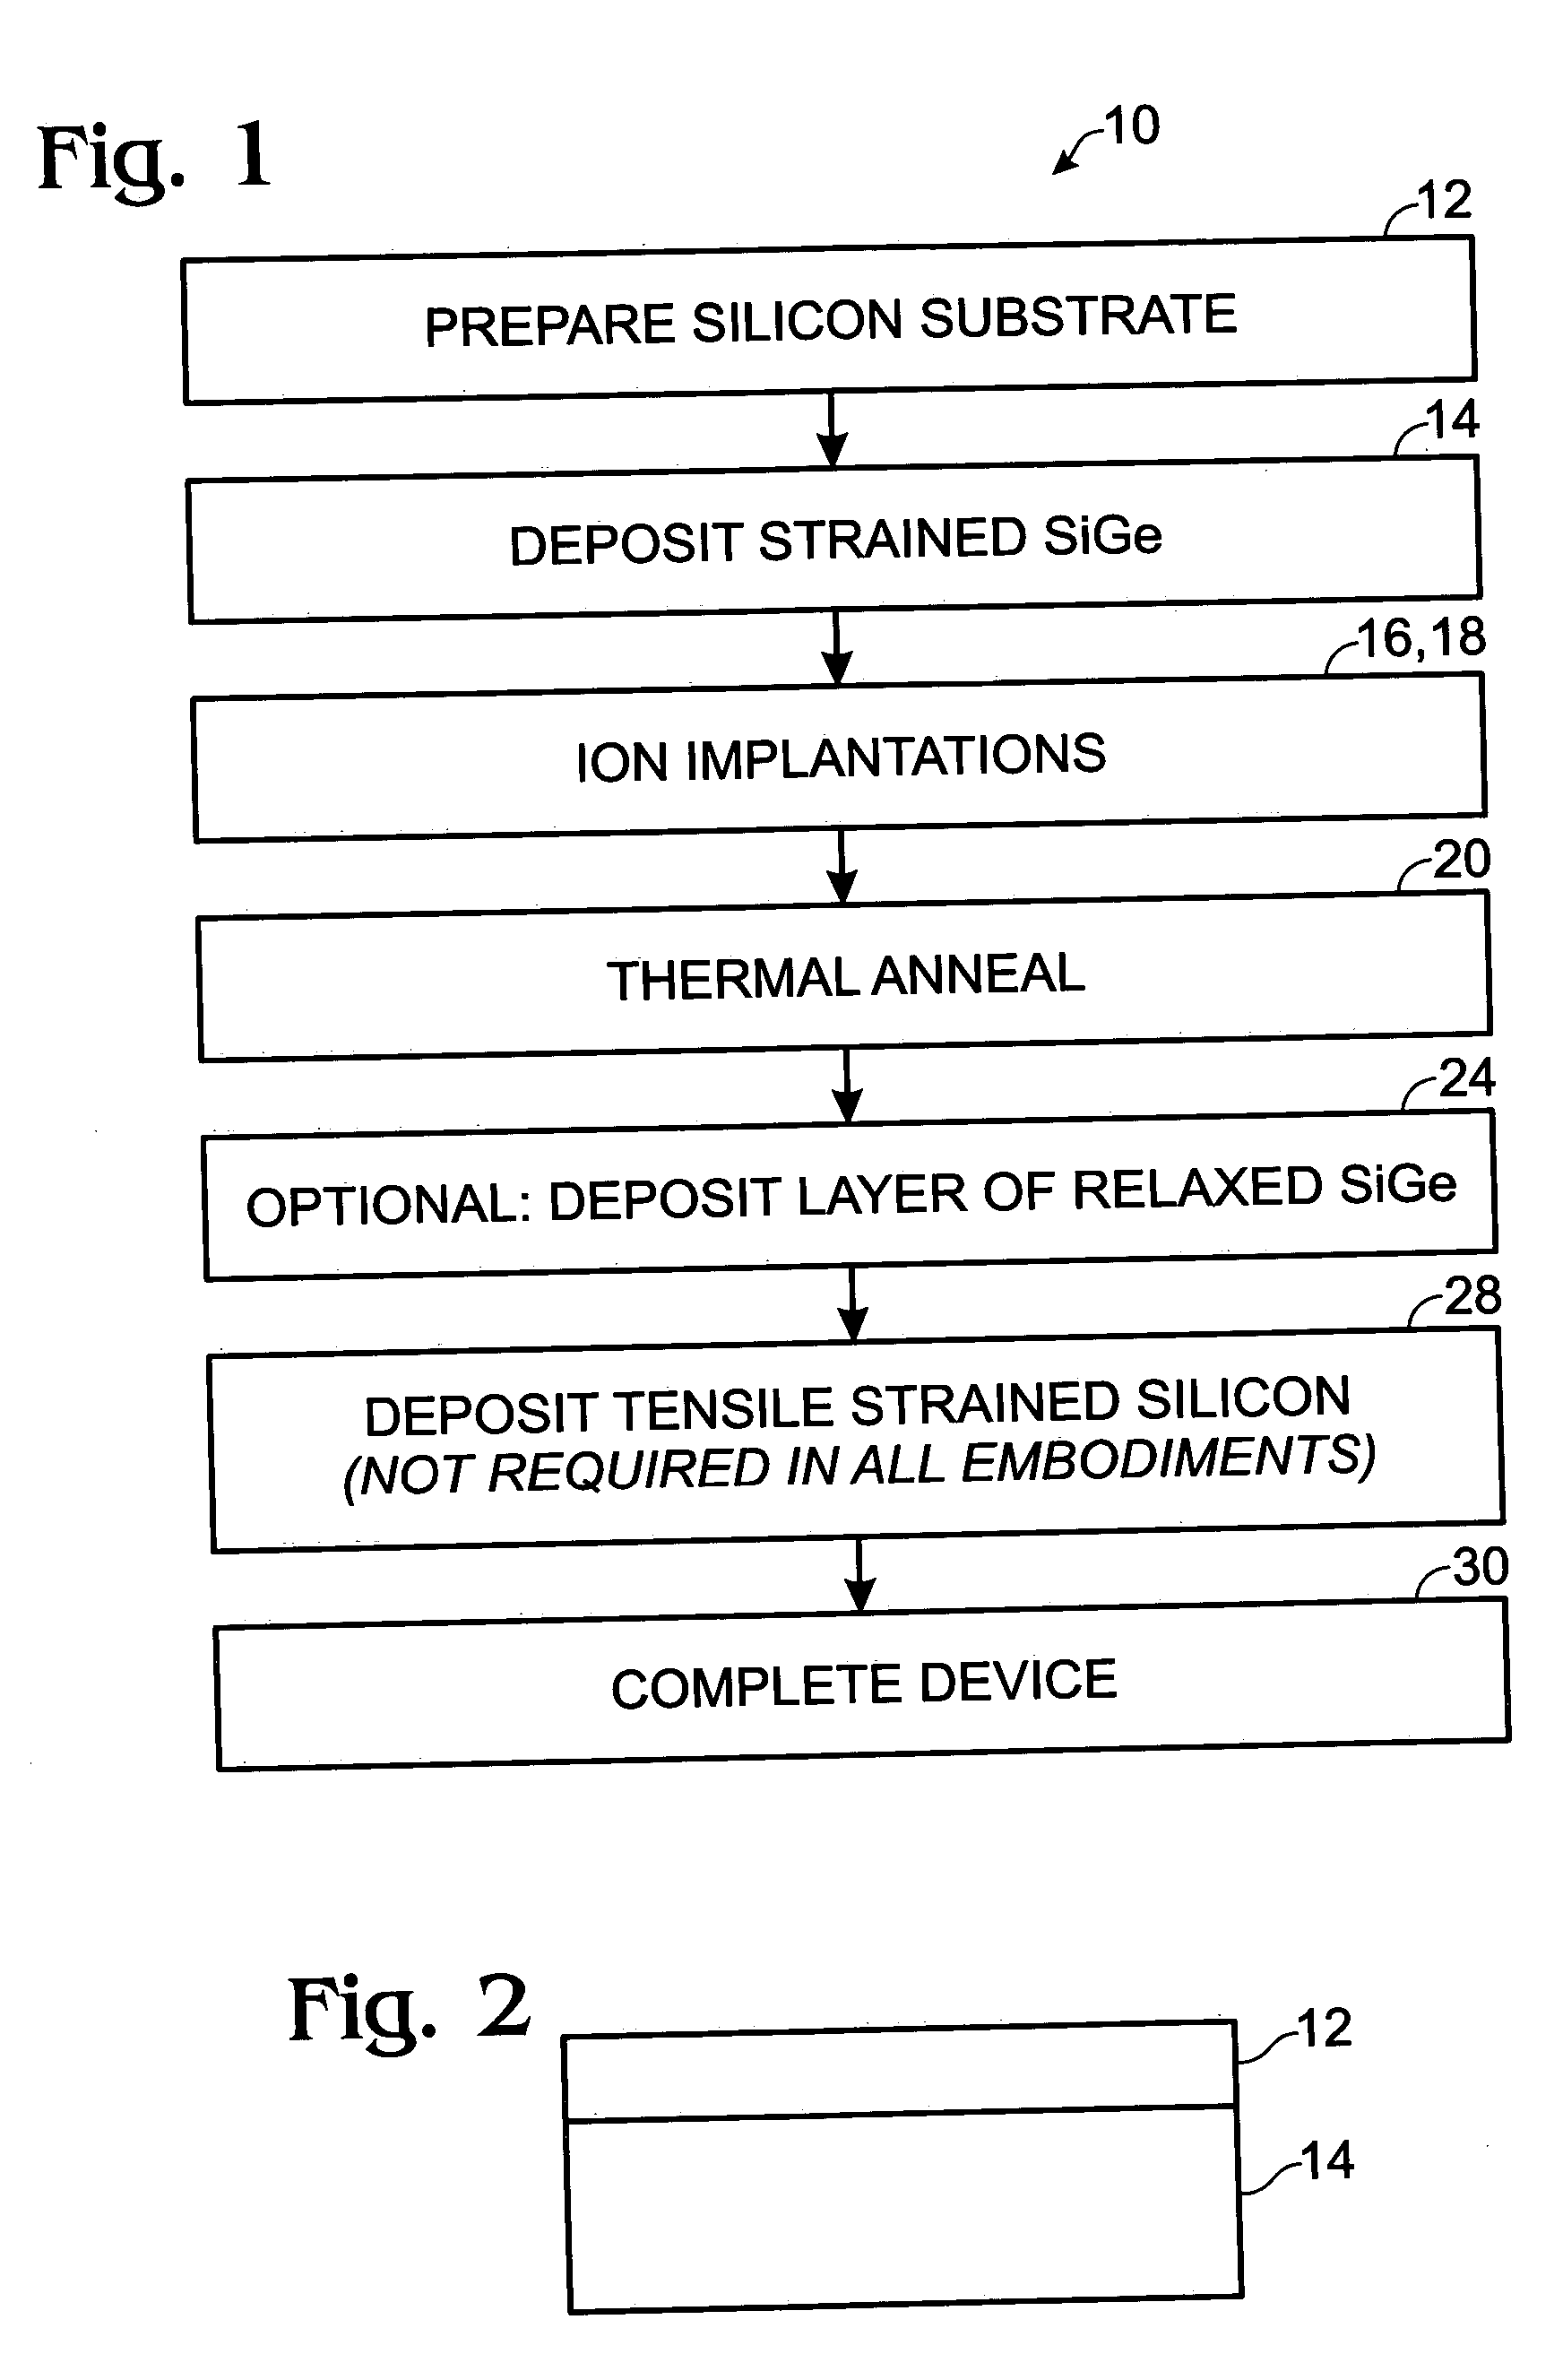 Method to form relaxed SiGe layer with high Ge content using co-implantation of silicon with boron or helium and hydrogen